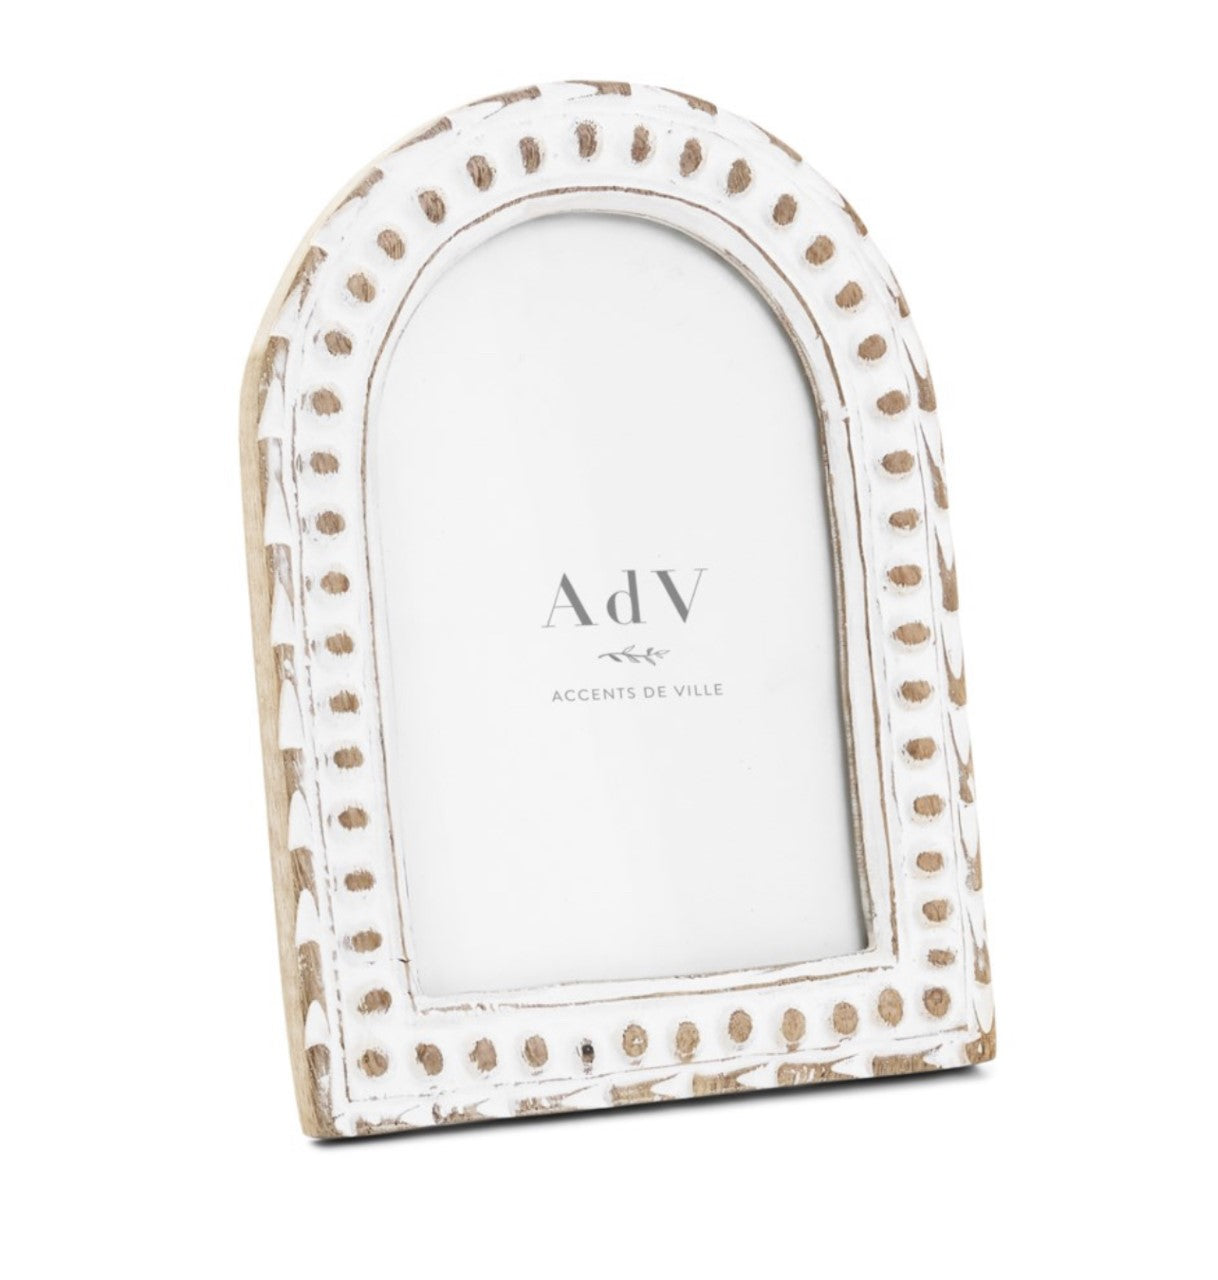 Arch Mango Wood Picture Frame